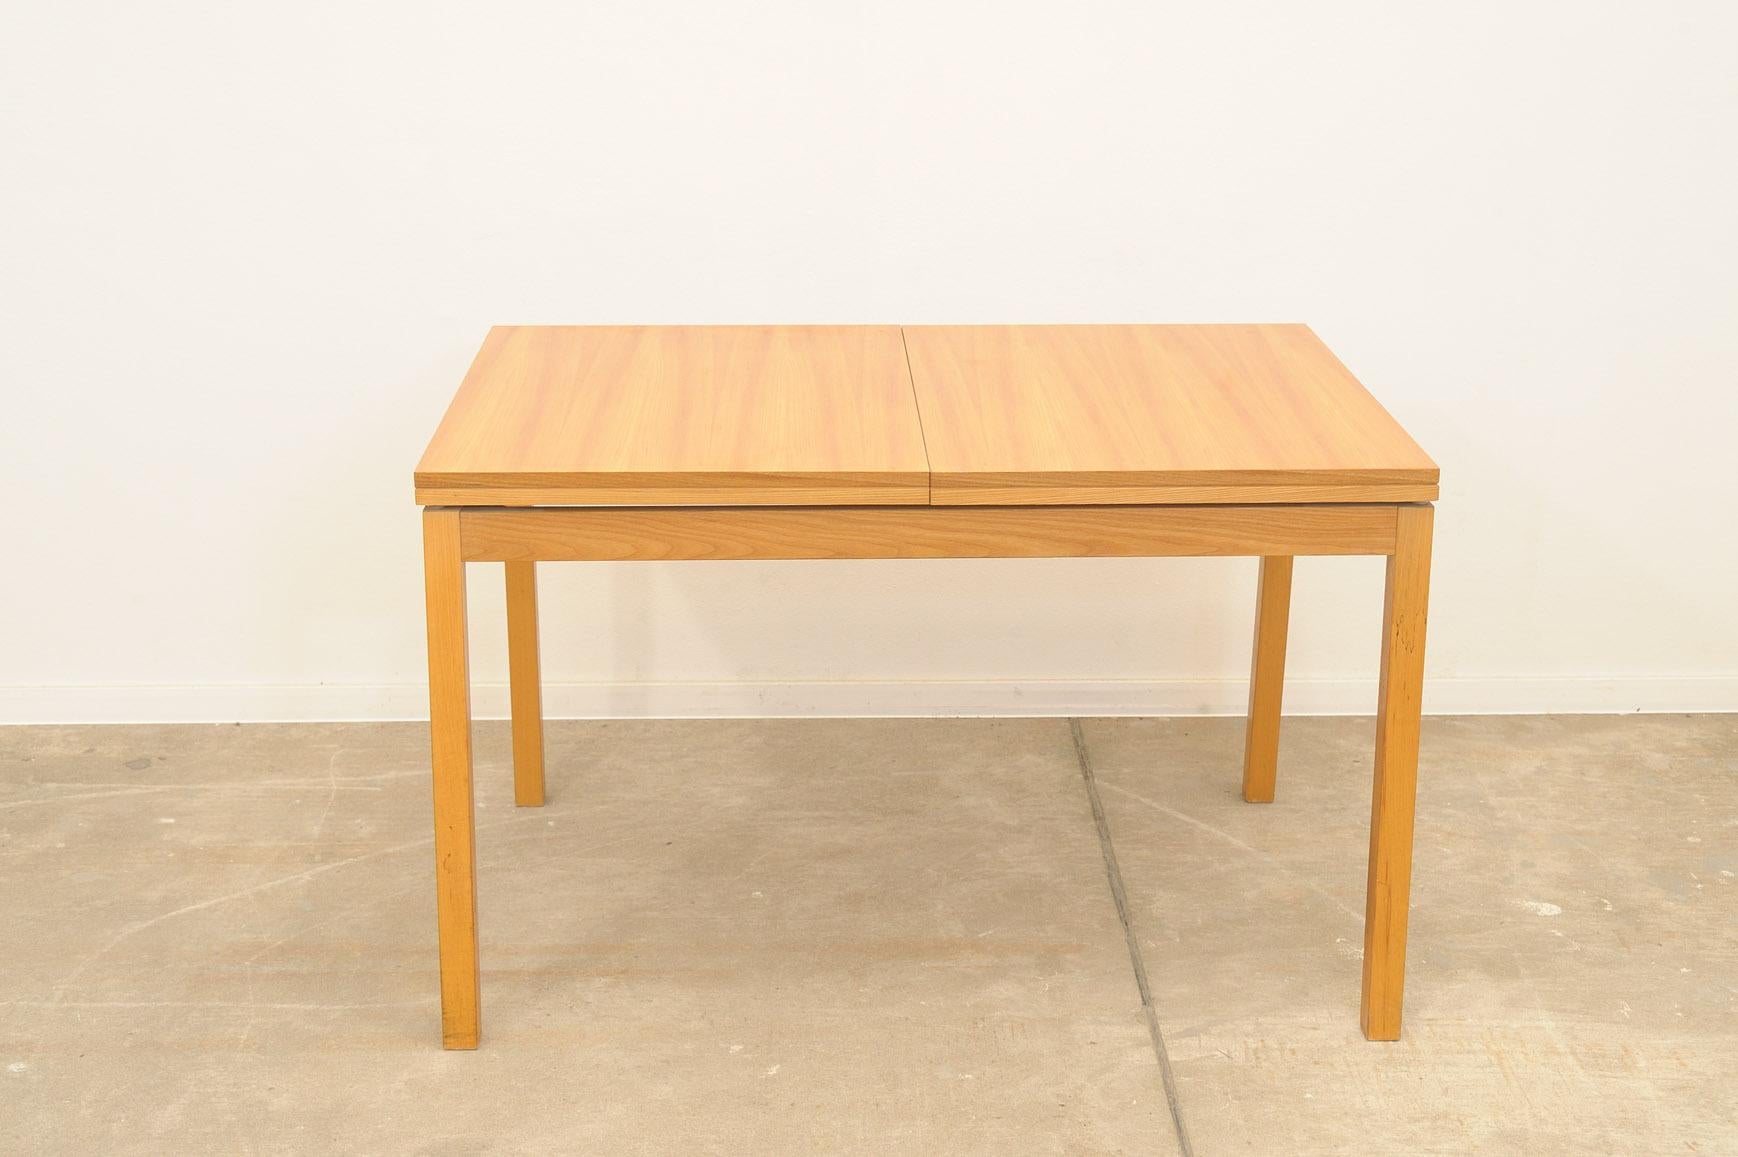 This adjustable dining table was made by JITONA company in the former Czechoslovakia in the 1970´s.  It ´s made of elm wood.  The lenght is adjustable from 120 cm to 170 cm. The table is in very good condition, showing slight signs of age and